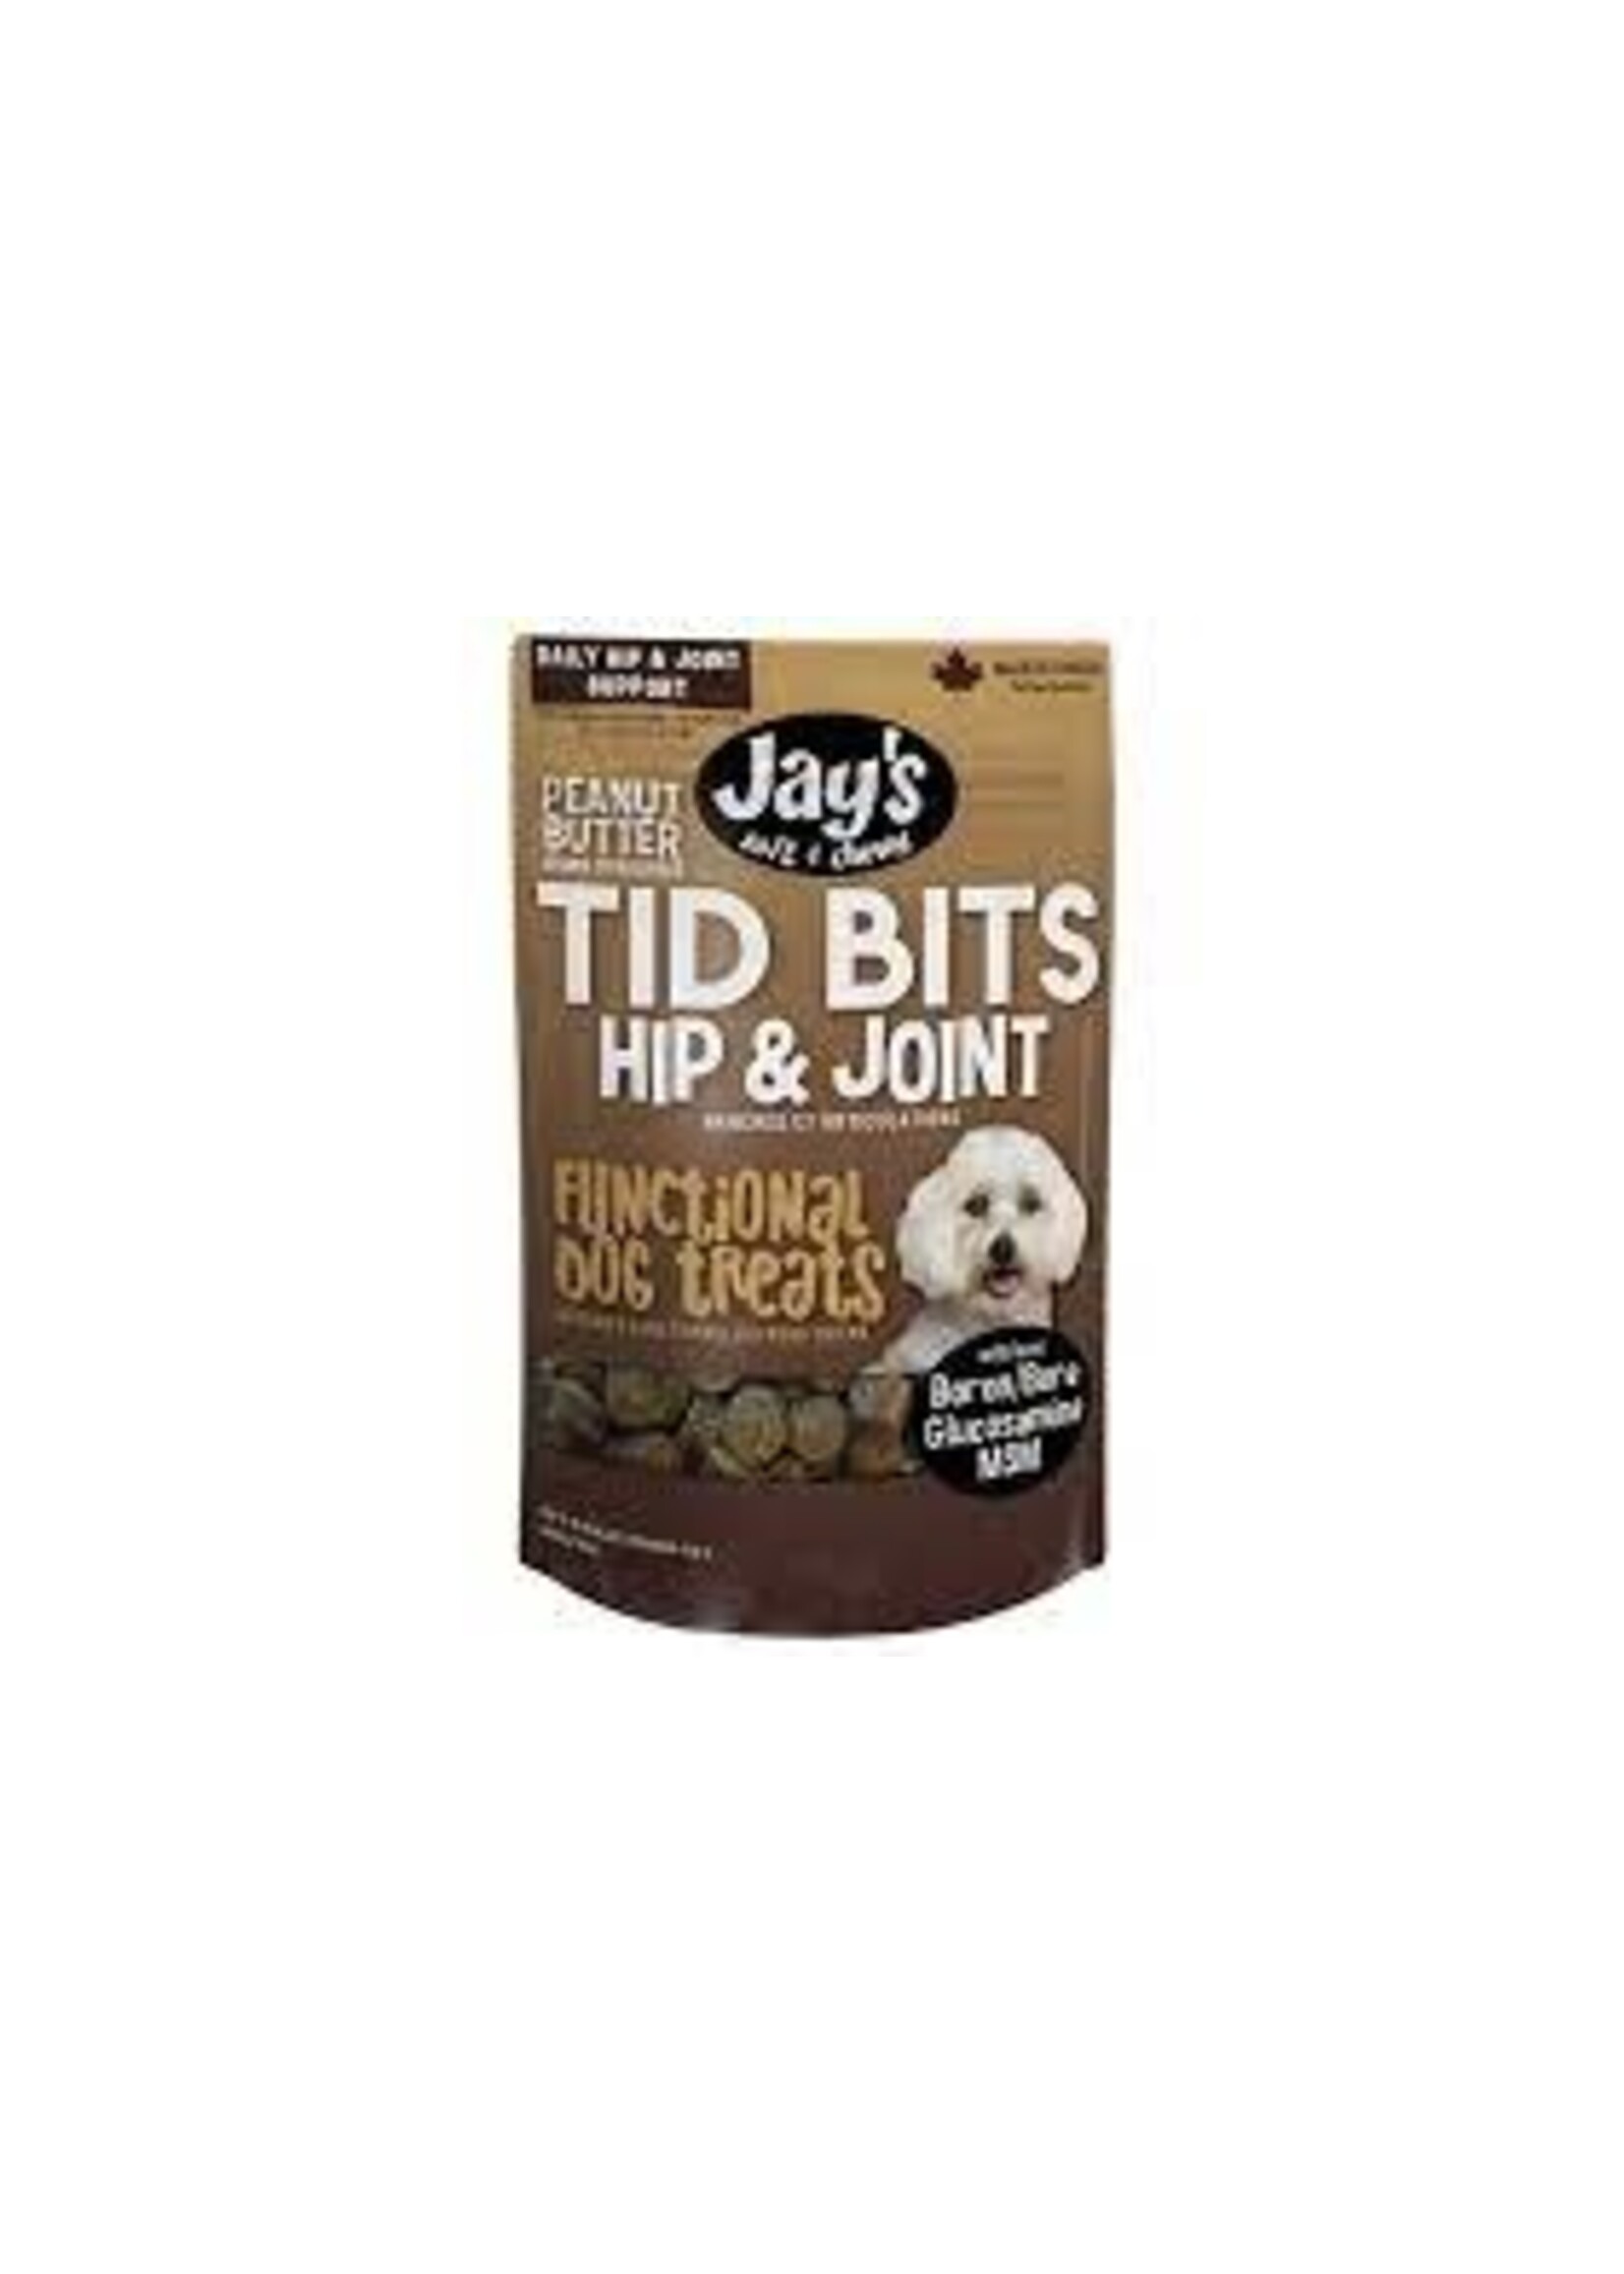 Jay's Jay's Tid Bits Peanut Butter Hip & Joint 200gm